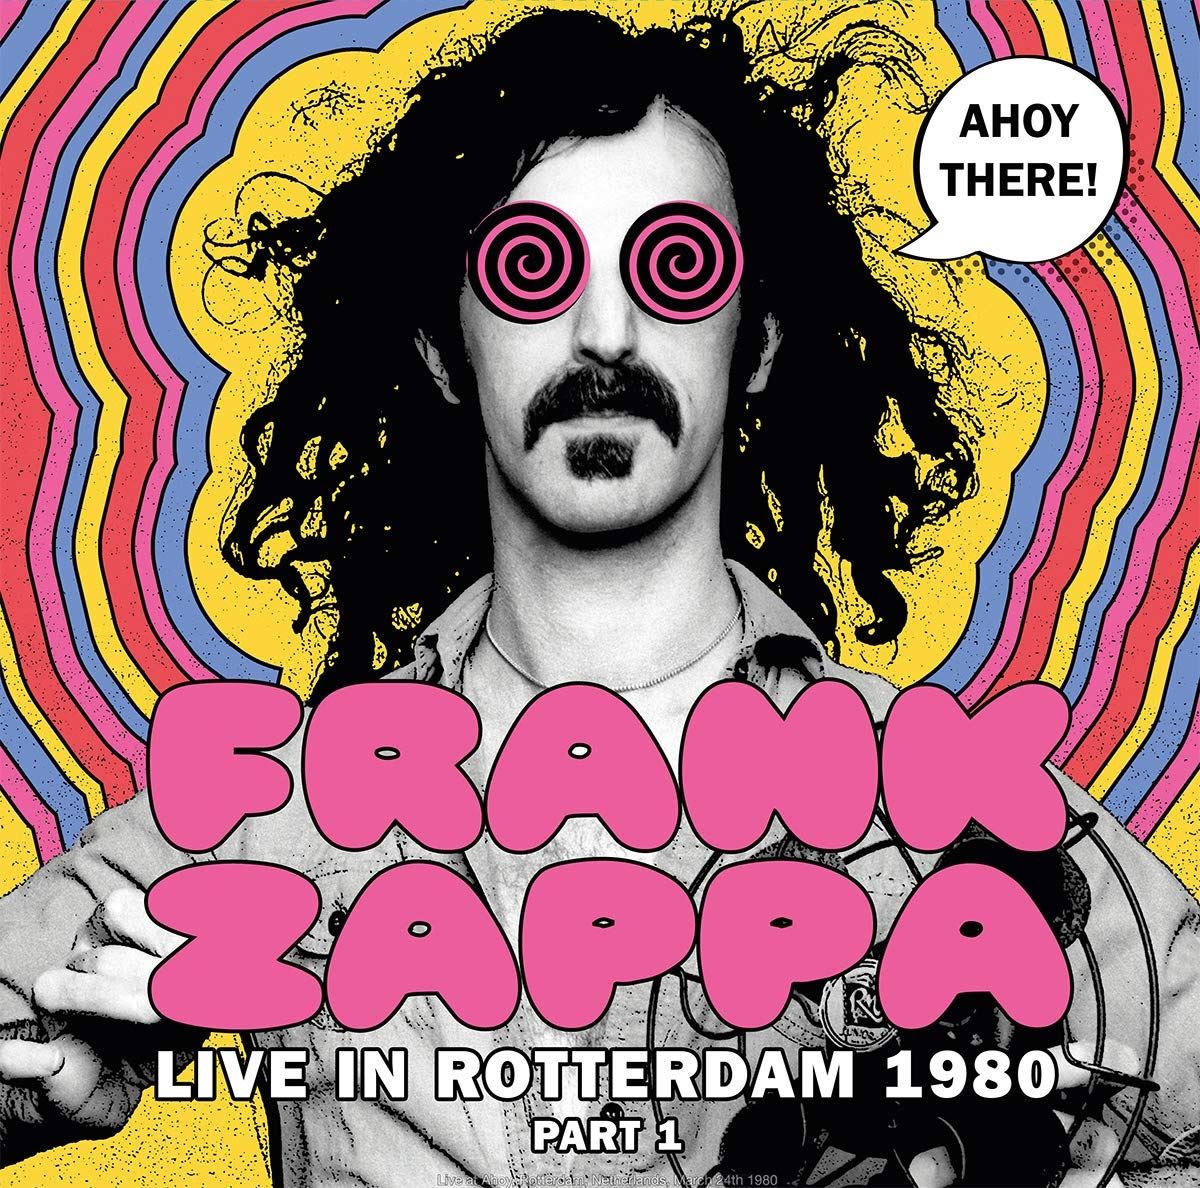 Frank Zappa - Ahoy There! Live In Rotterdam 1980 (Part 1) - Vinyl